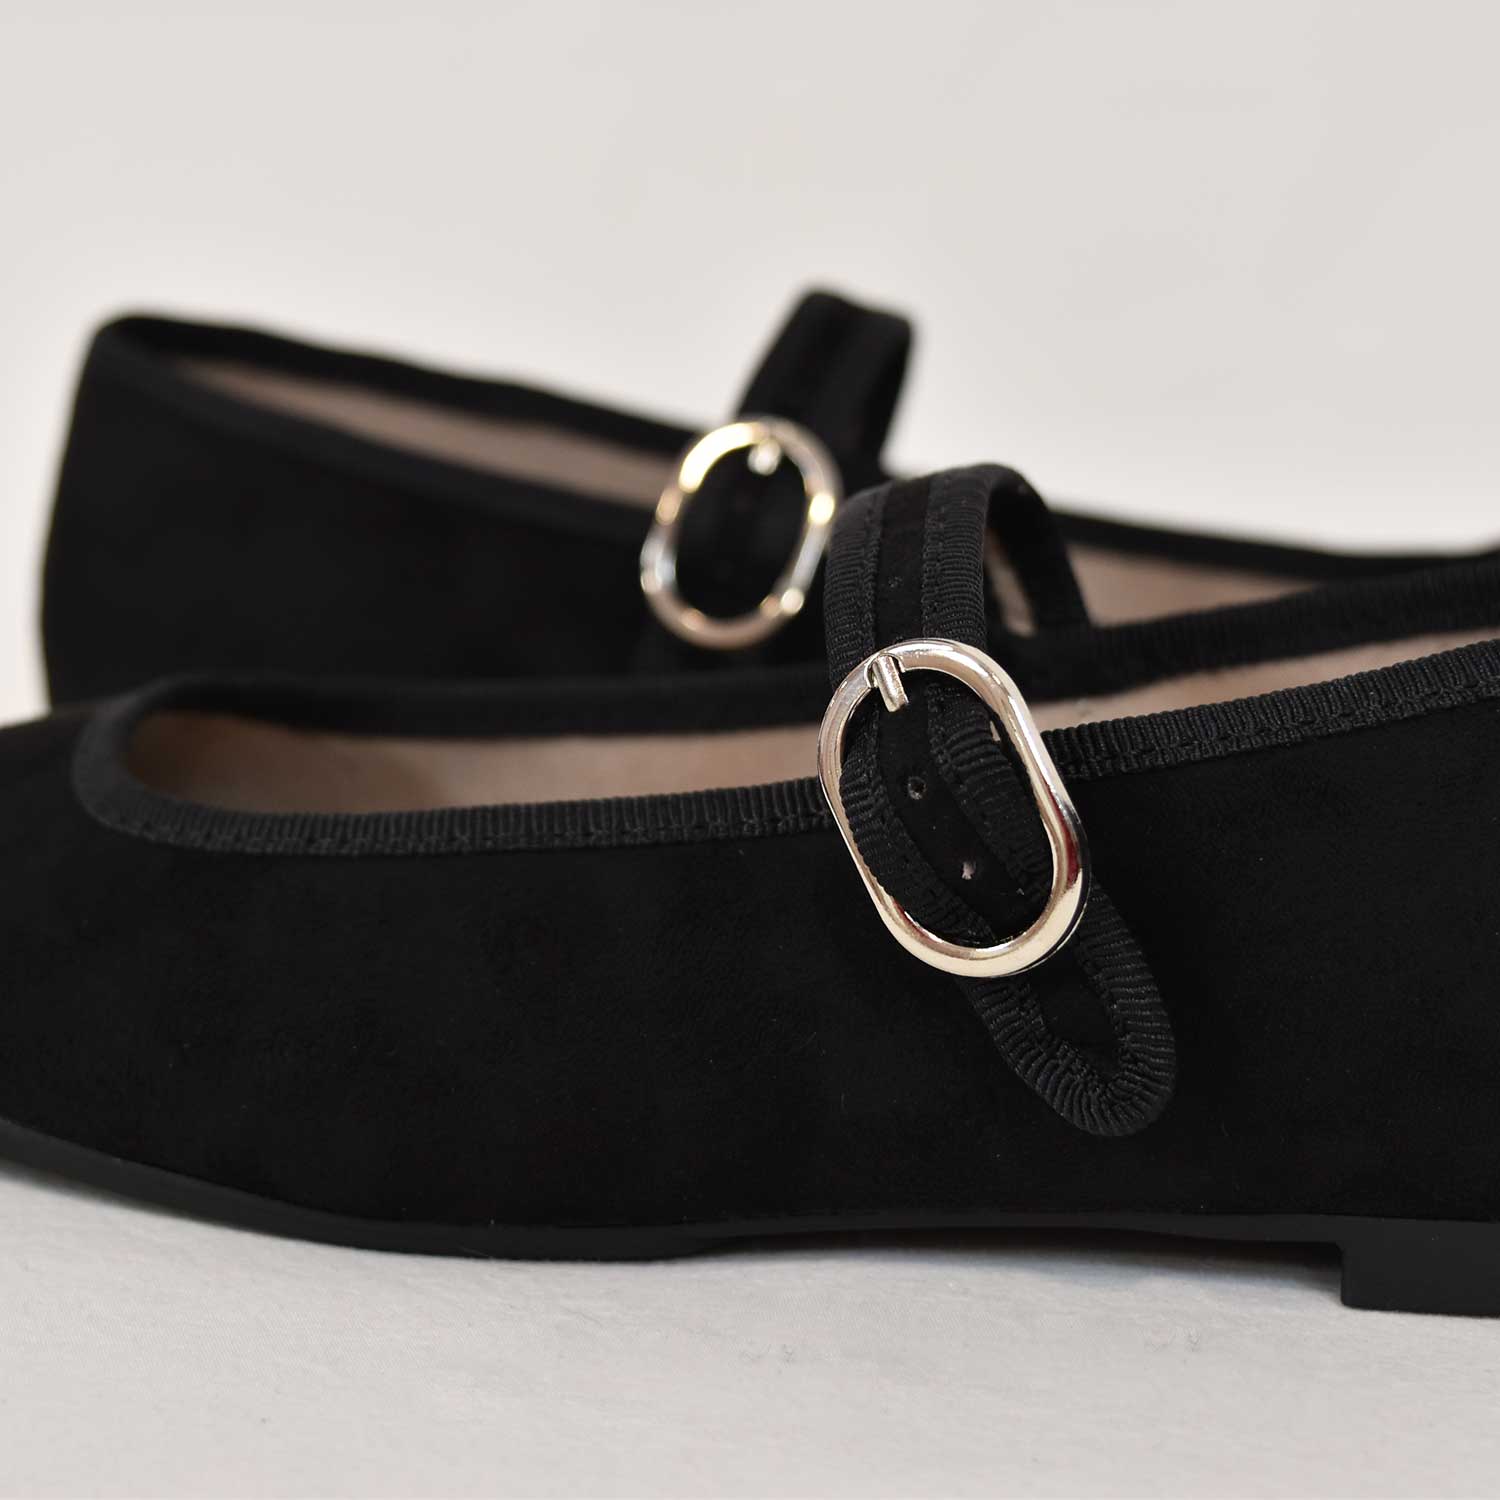 chaussures mary jane noir